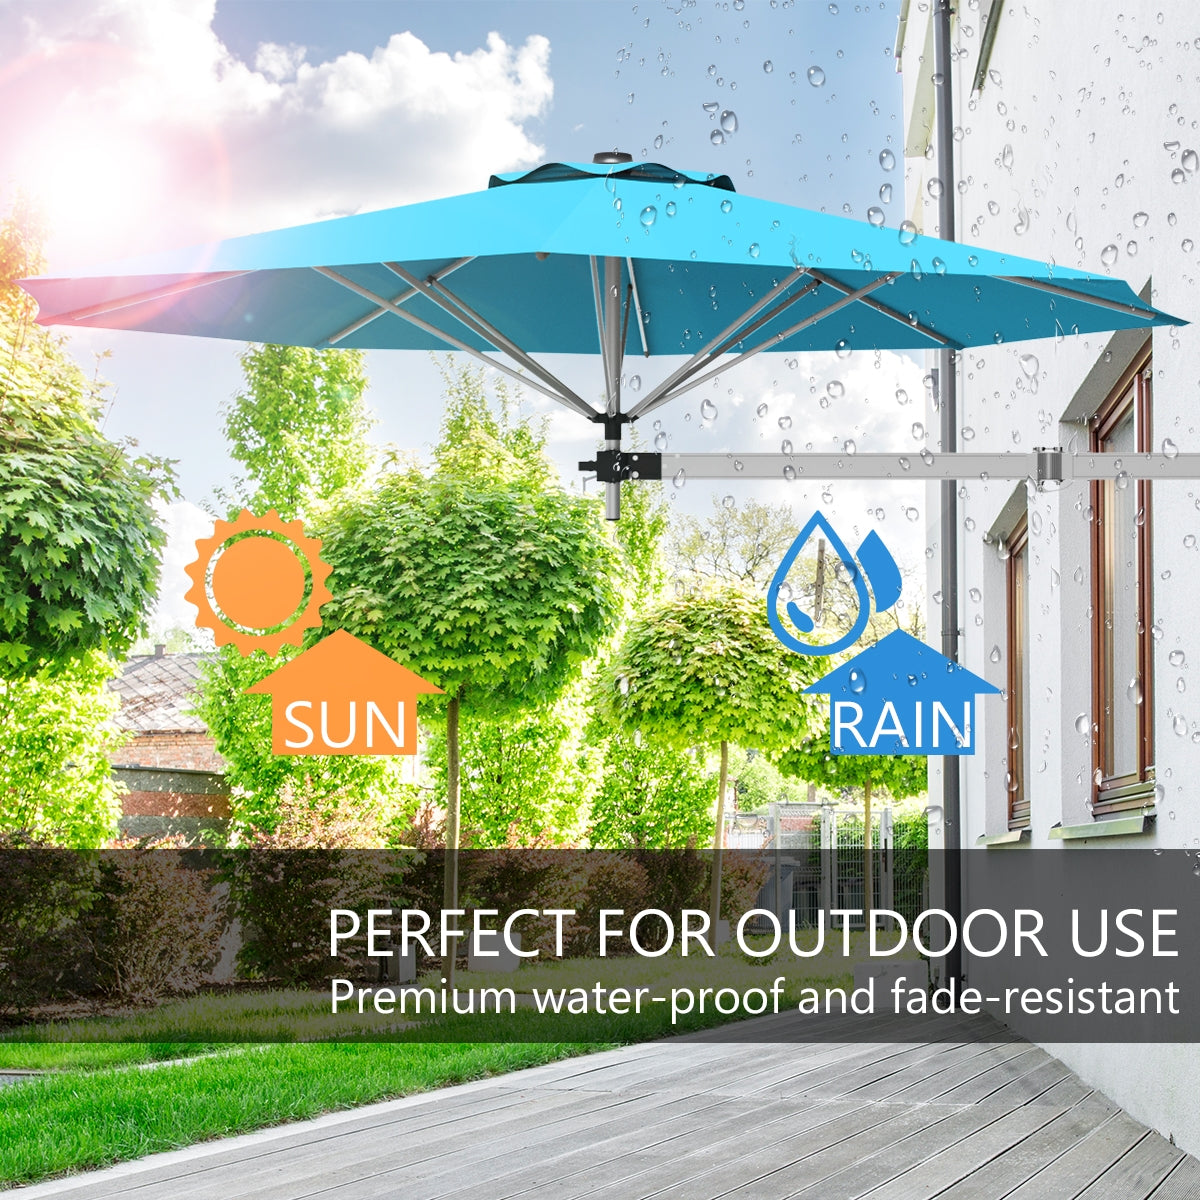 <strong>Durable Polyester Canopy:</strong> The patio umbrella features a durable polyester canopy that blocks harmful UV rays and shields you from rain with its waterproof design. Enjoy uninterrupted relaxation in any weather thanks to its sturdy aluminum frame and rust-resistant construction.